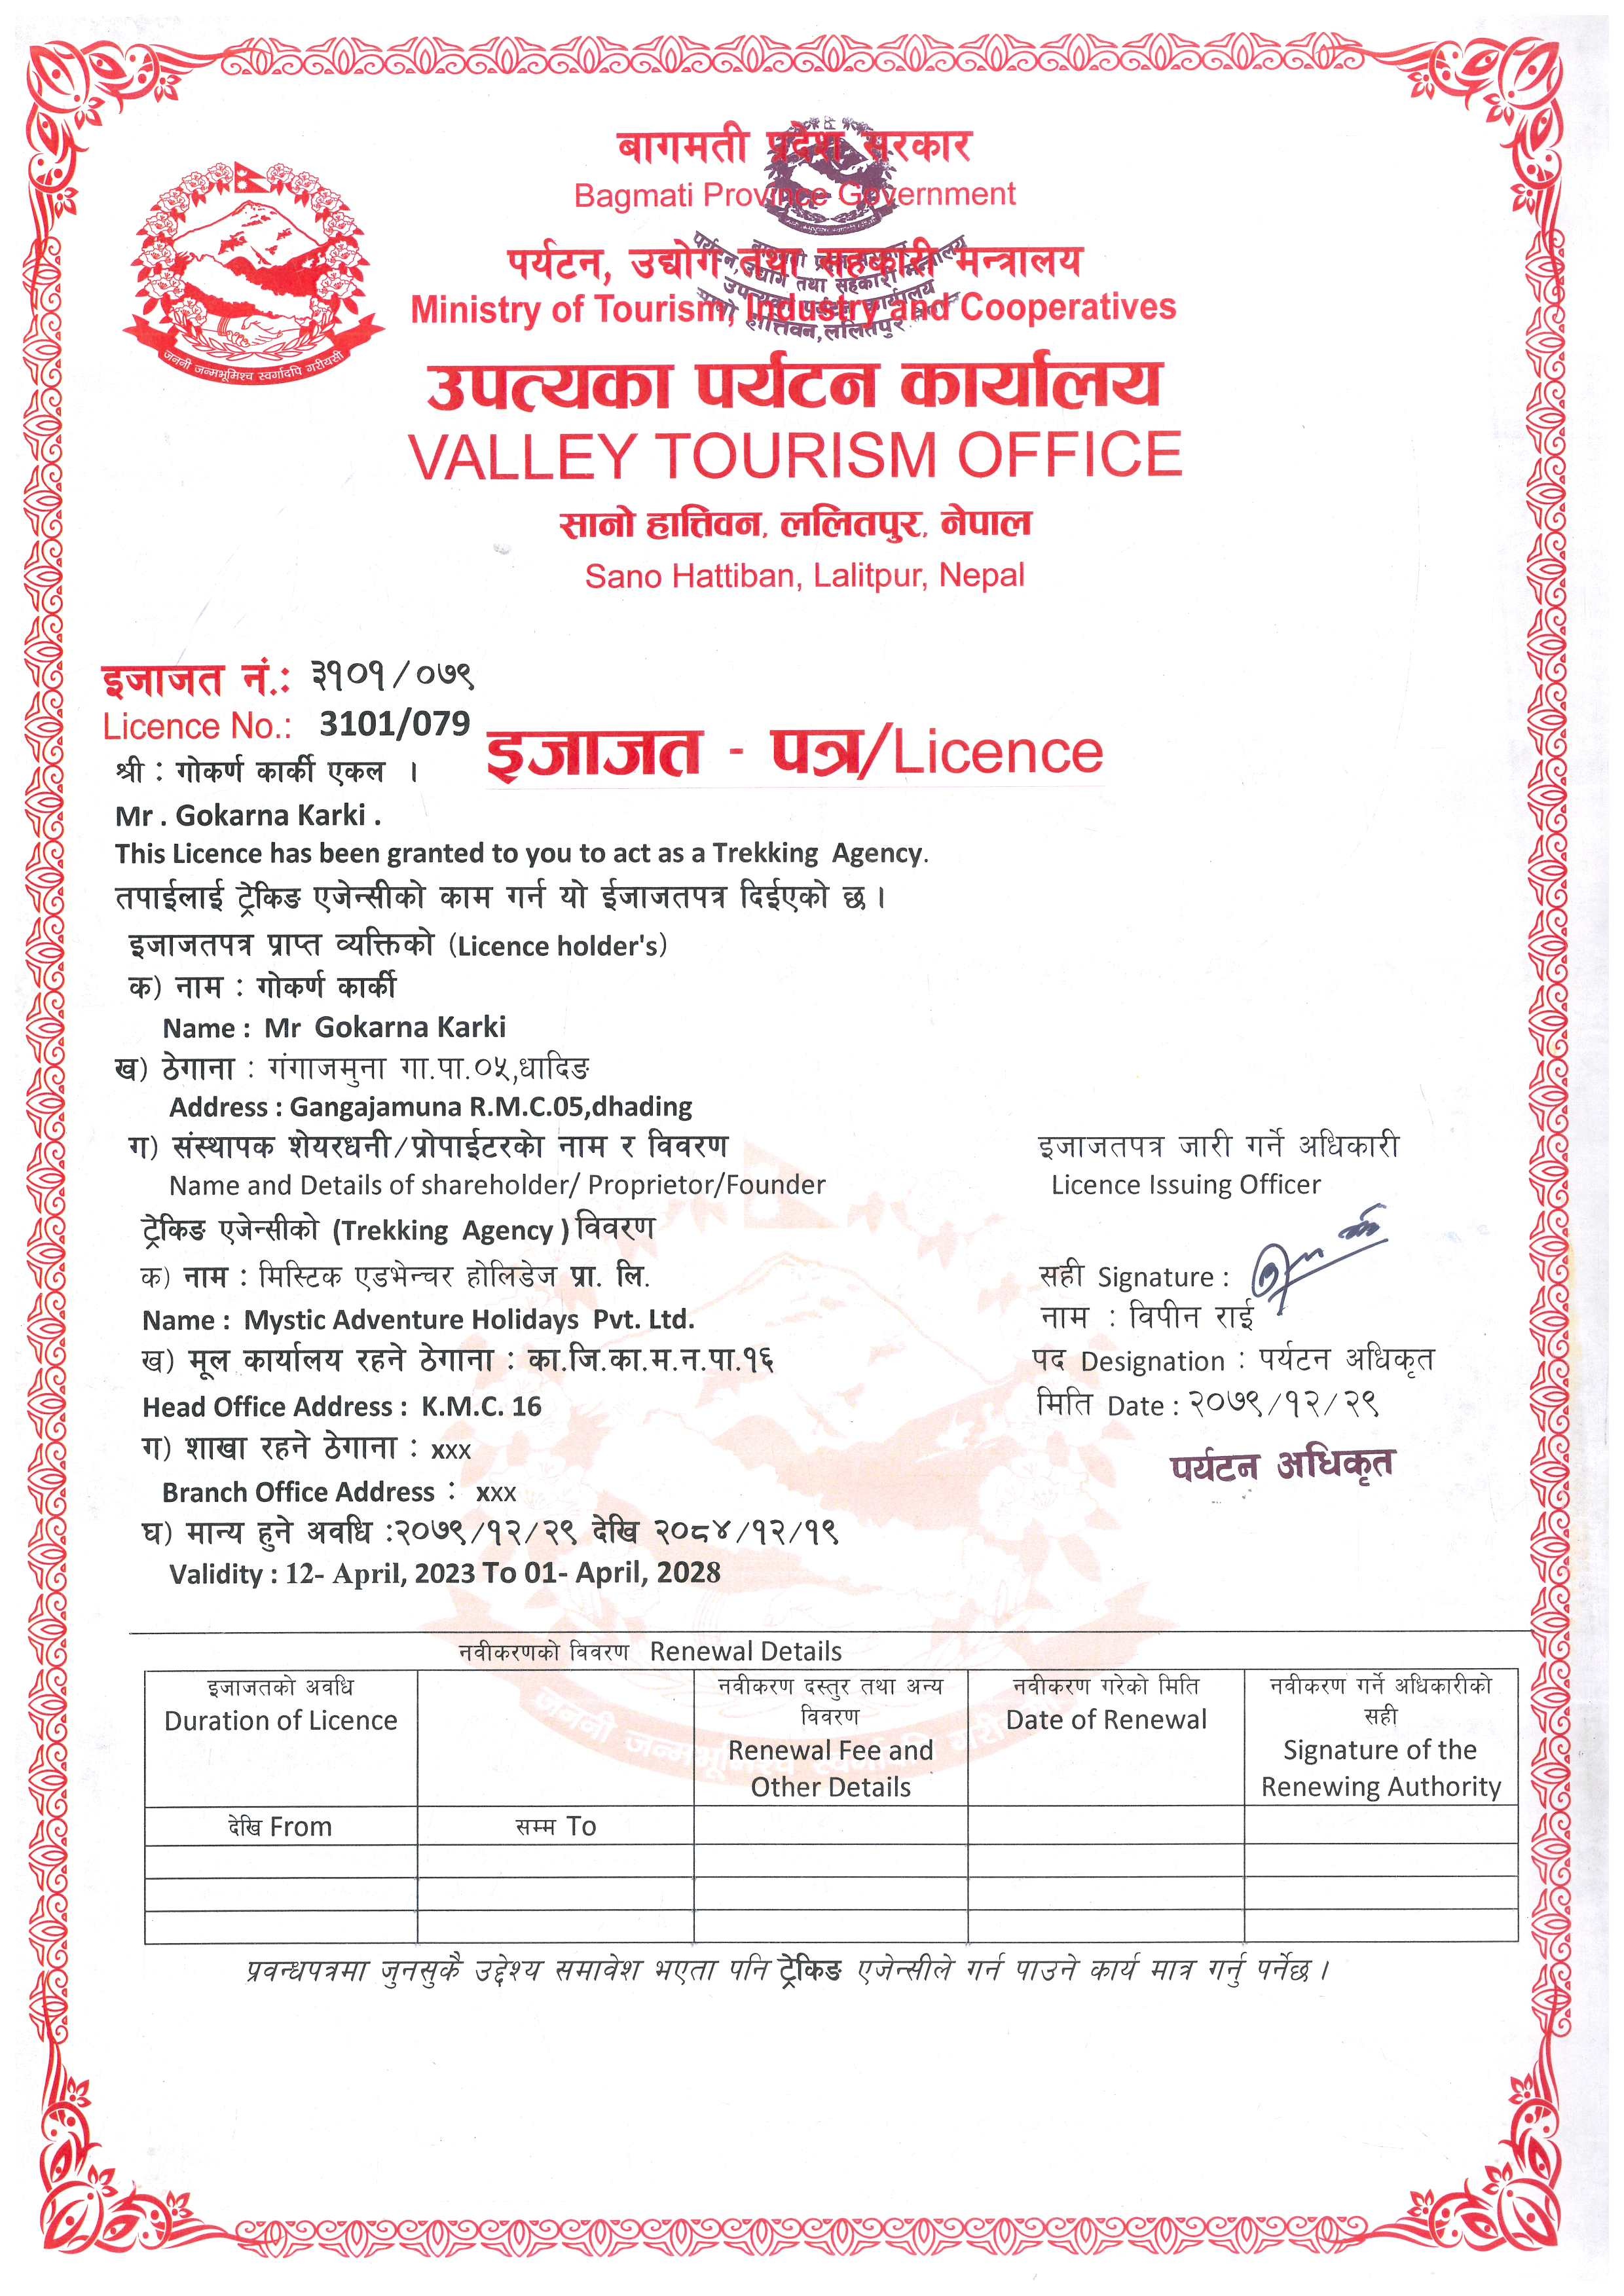 License from Department of Tourism to work as Travel/Trekking agency